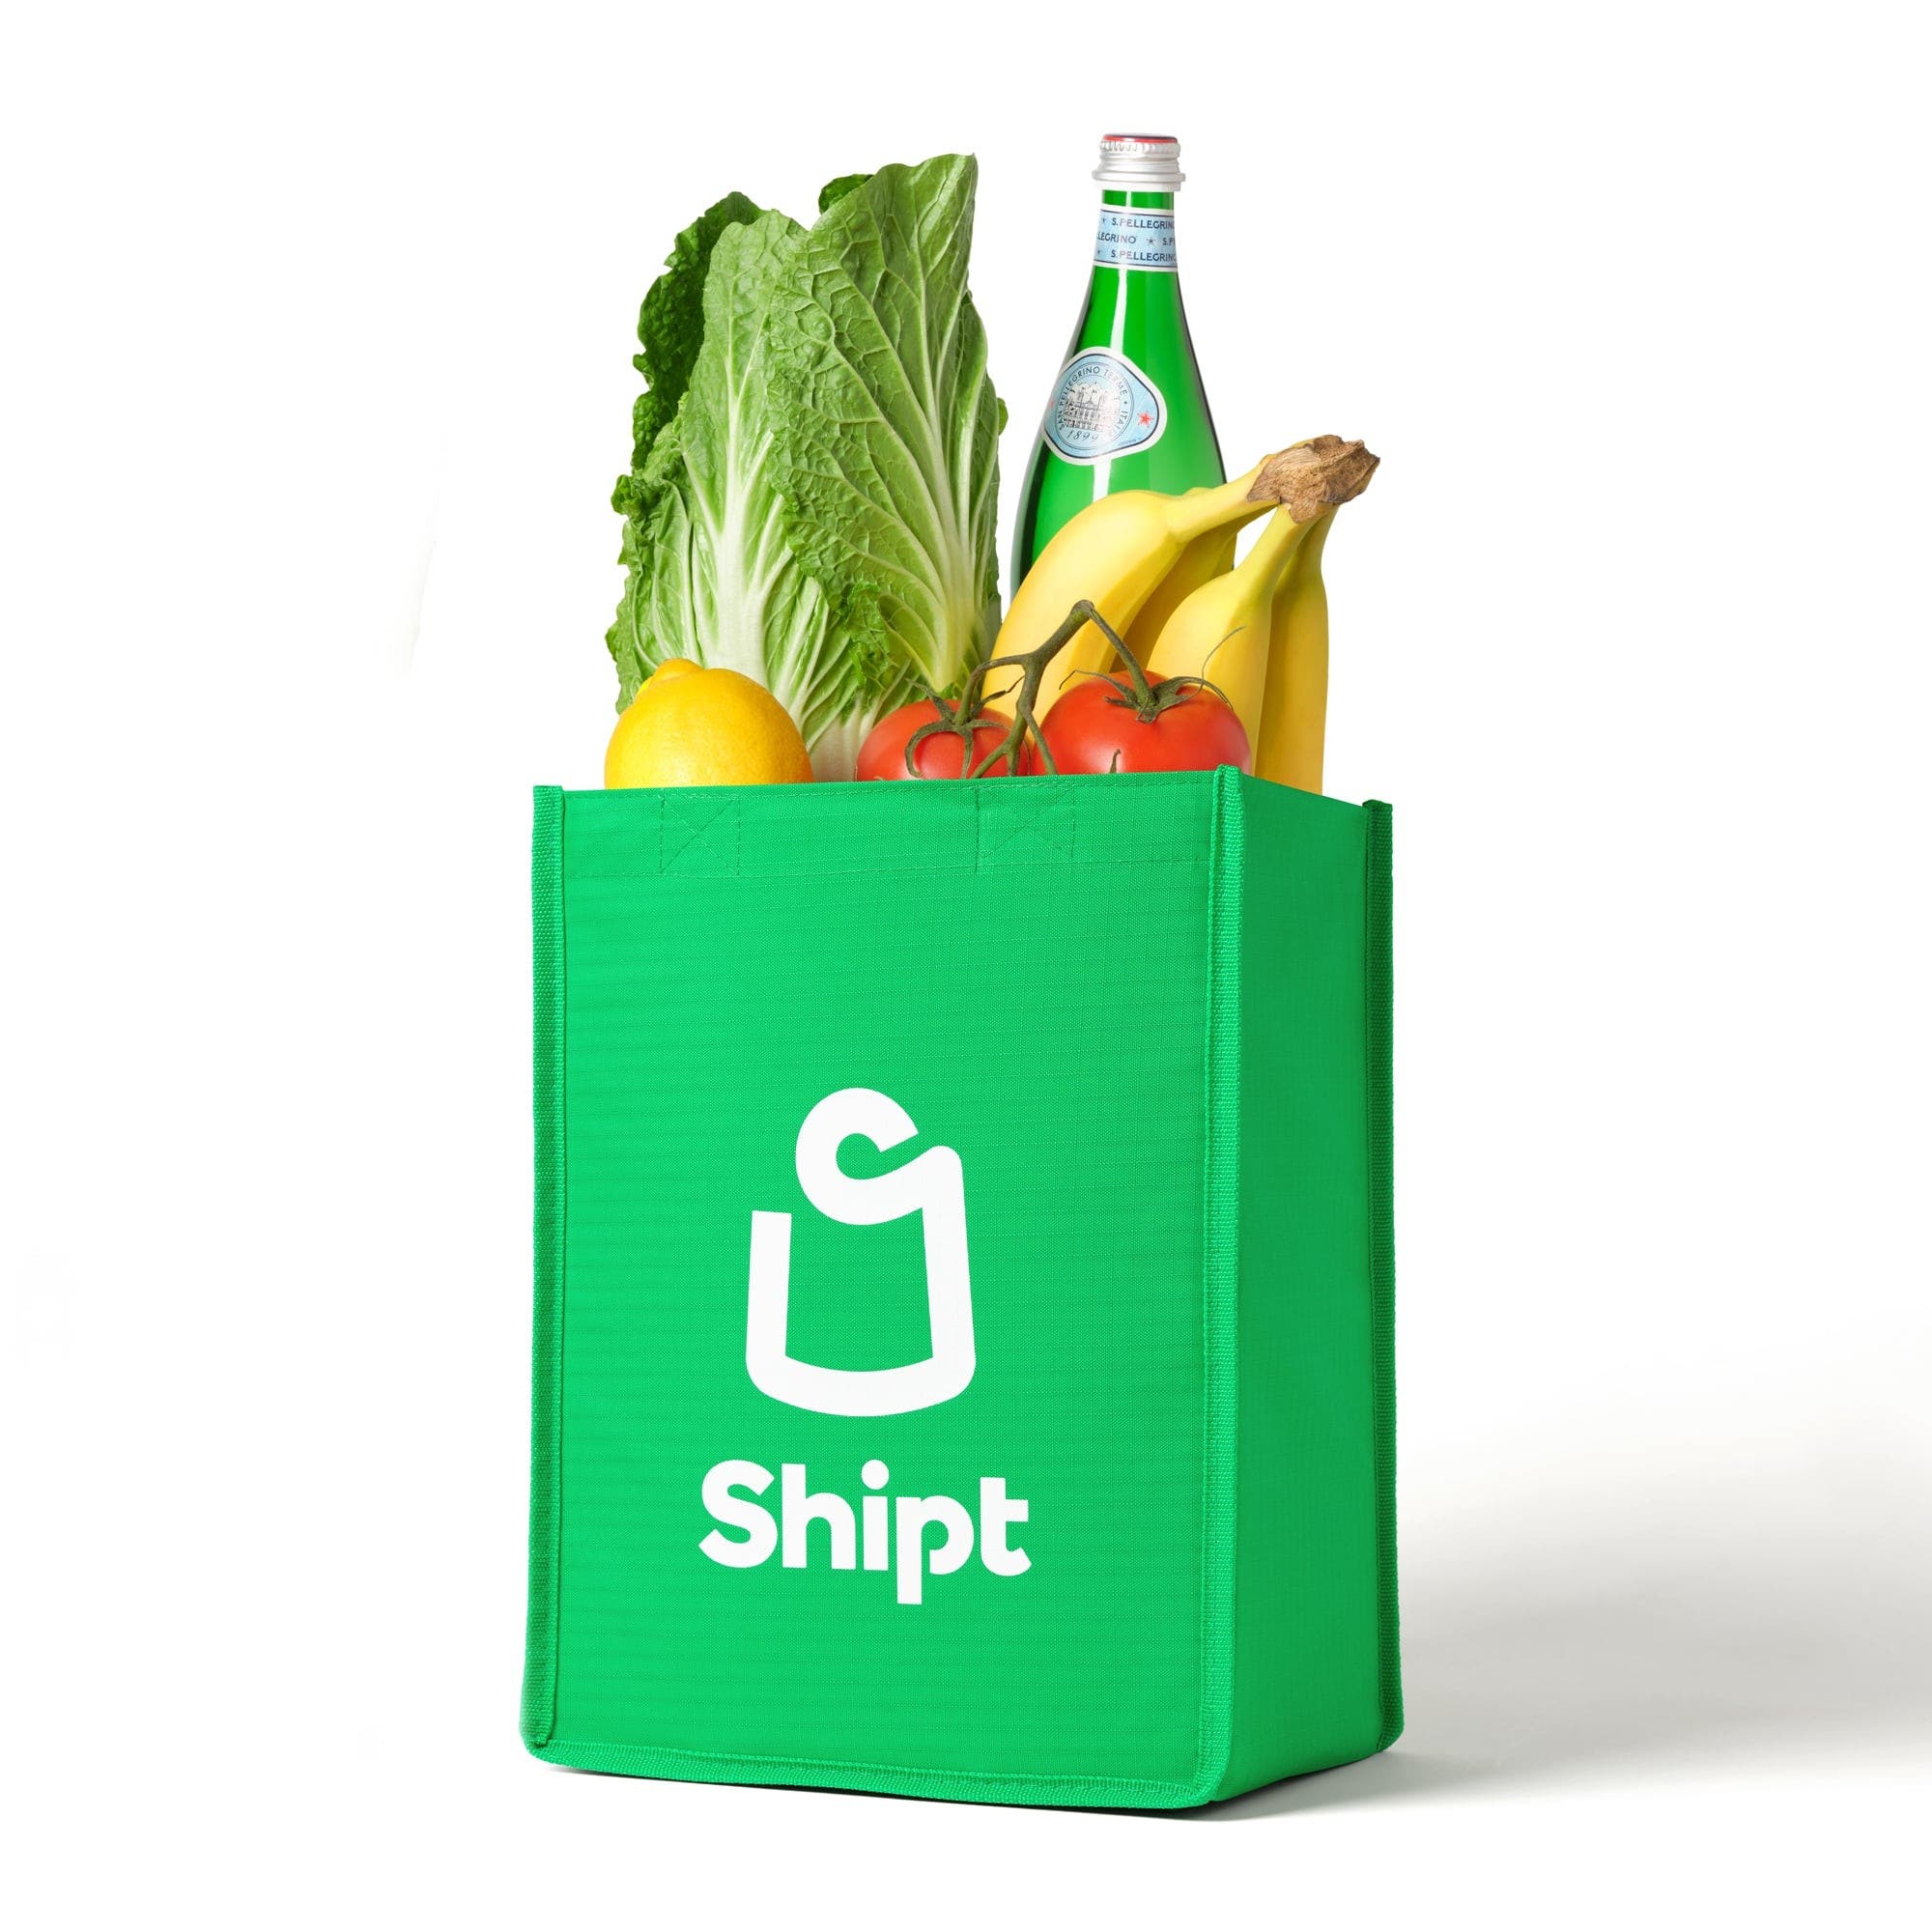 Bag of groceries from Shipt